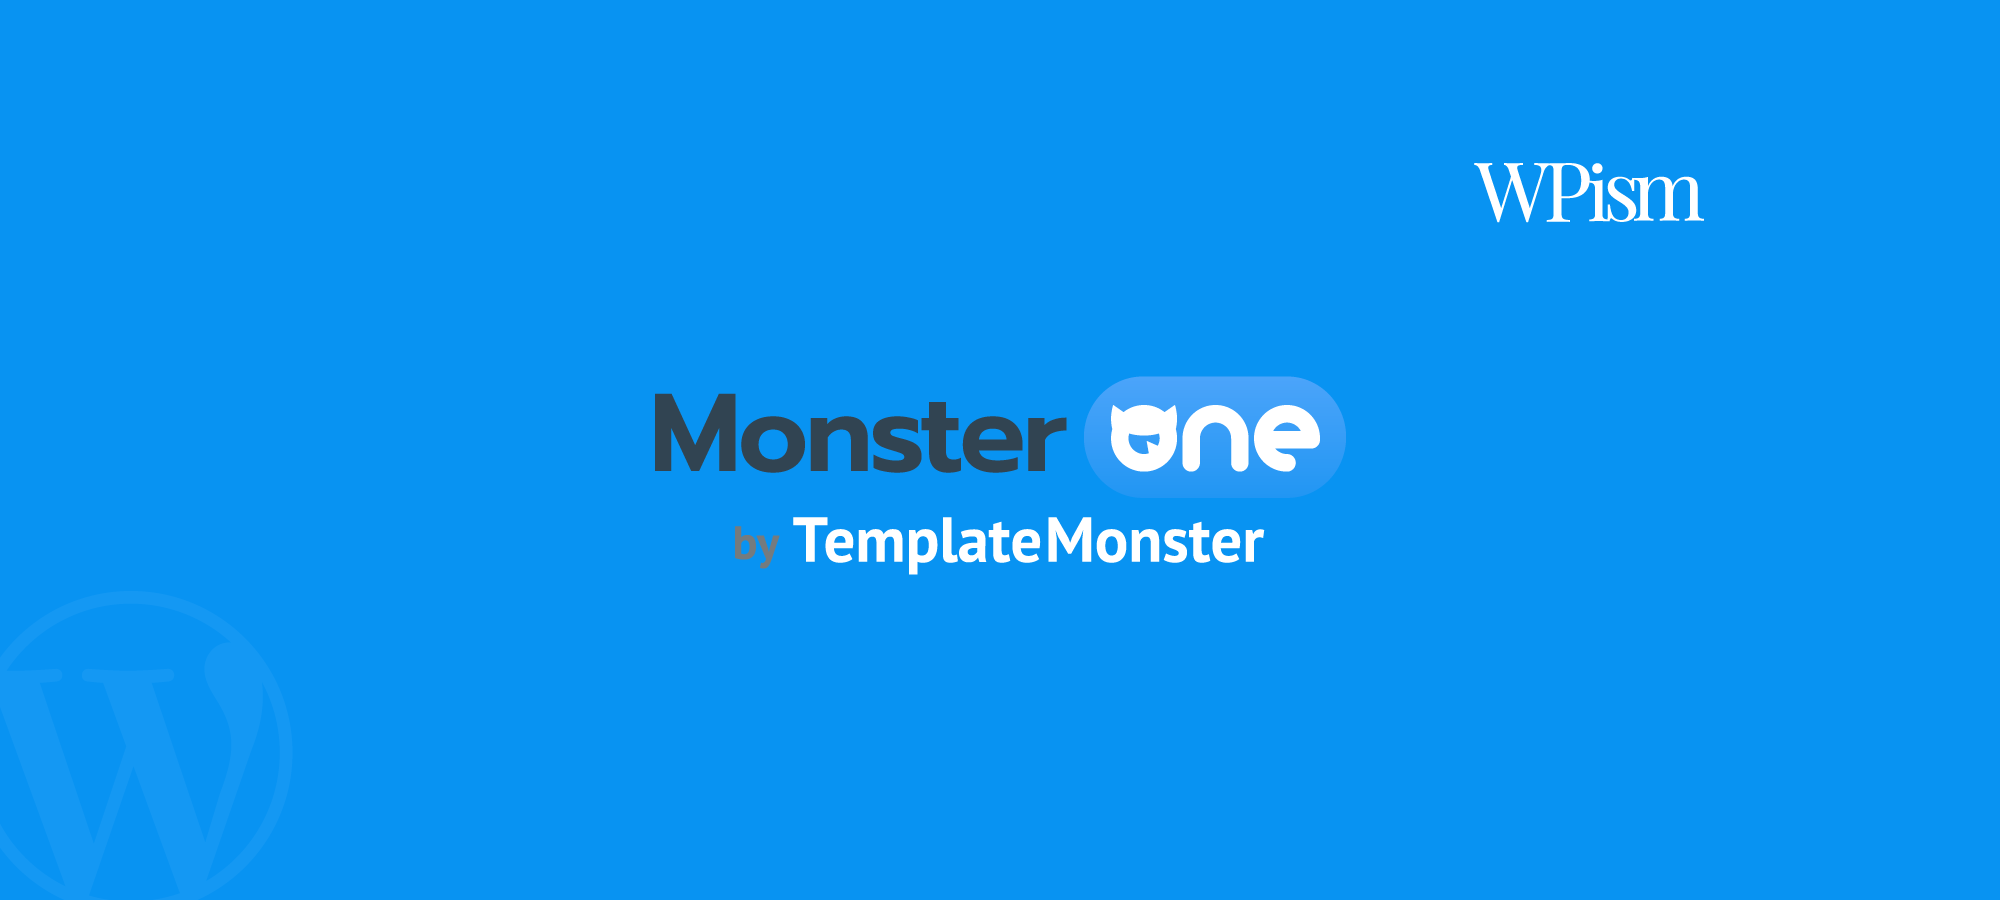 MonsterONE Subscription Service: Complete Guide 2023